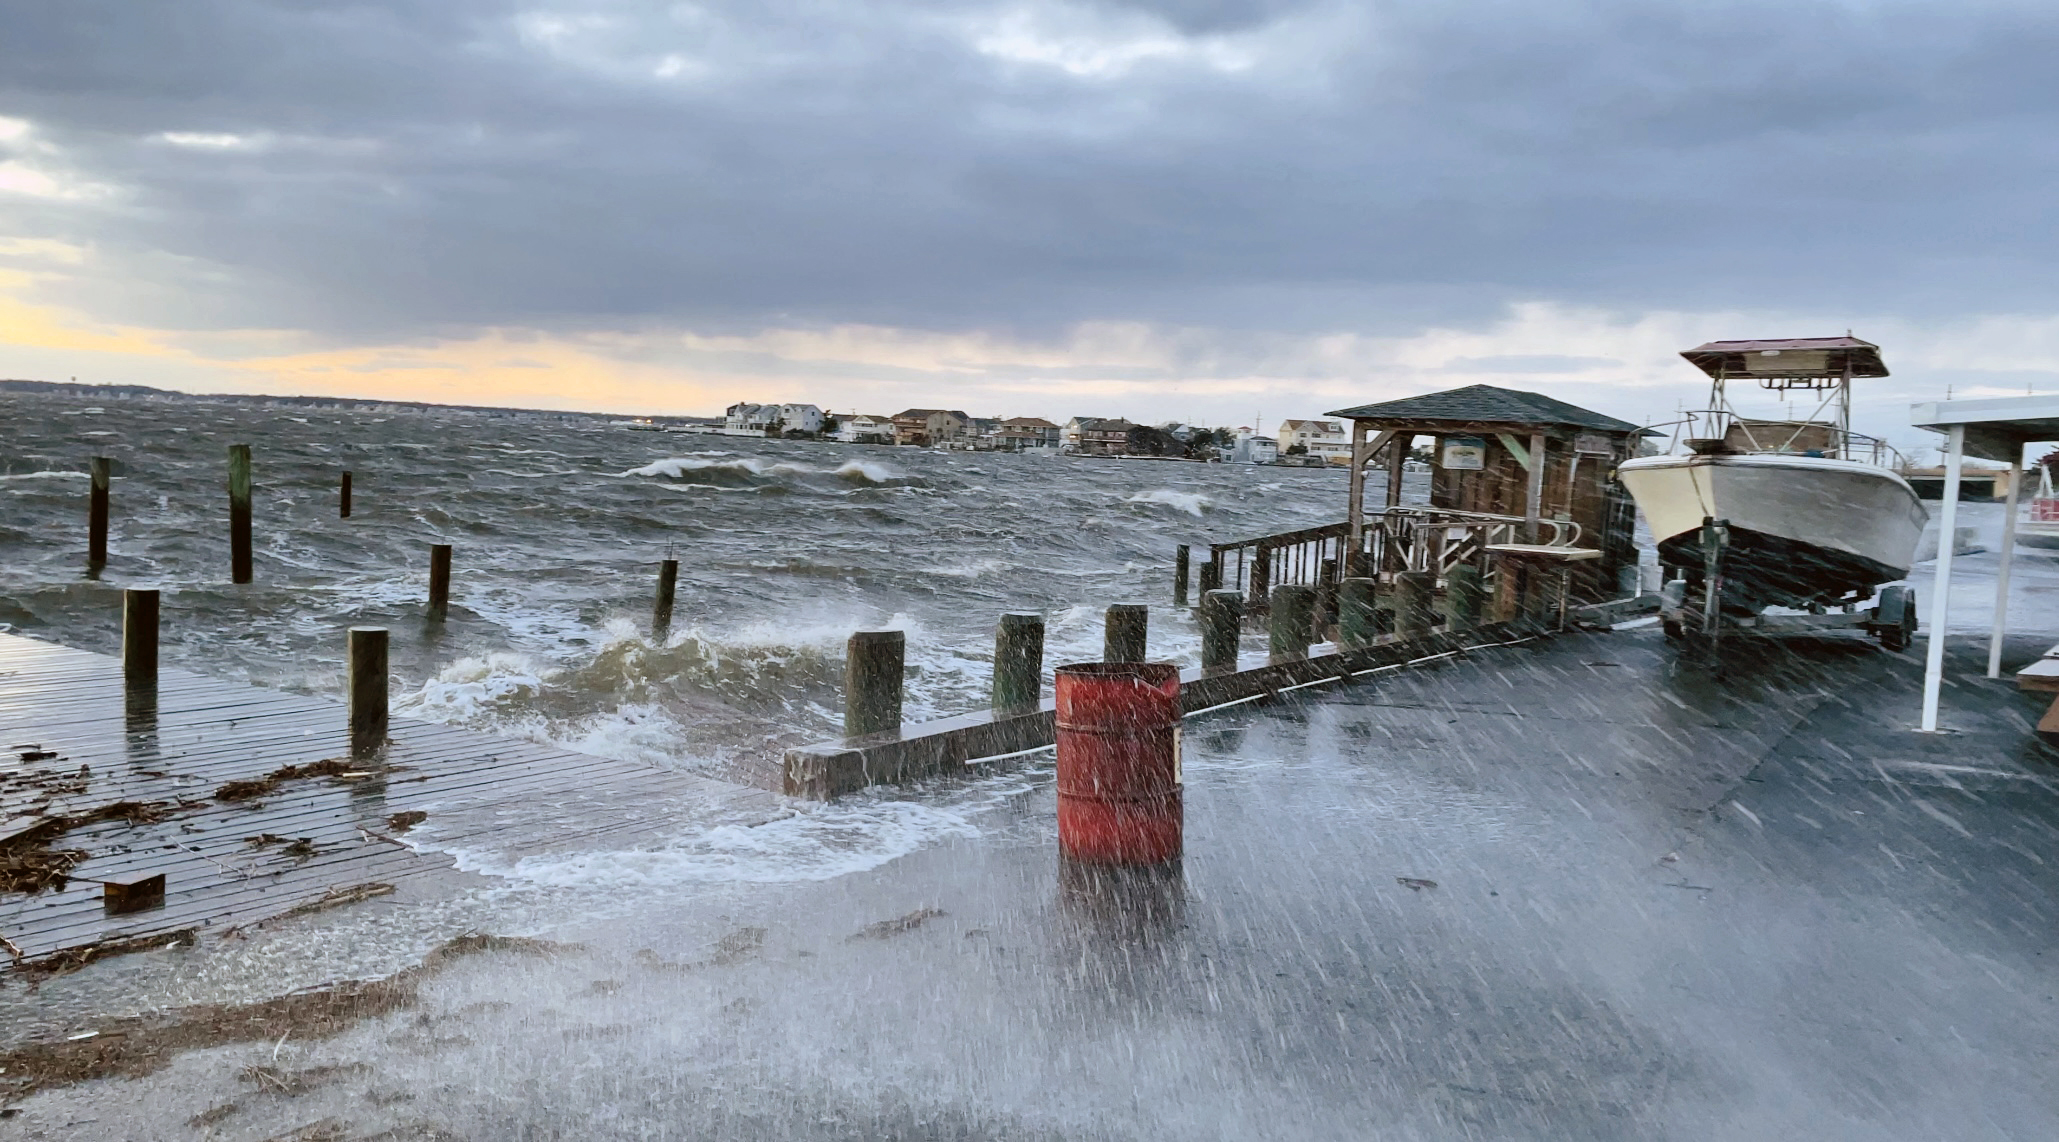 Strong winds push waves and spray onshore after a cold frontal passage on December 23rd in Seaside Heights (photo credit: Daniel Nee/Lavallette-Seaside Shorebeat).